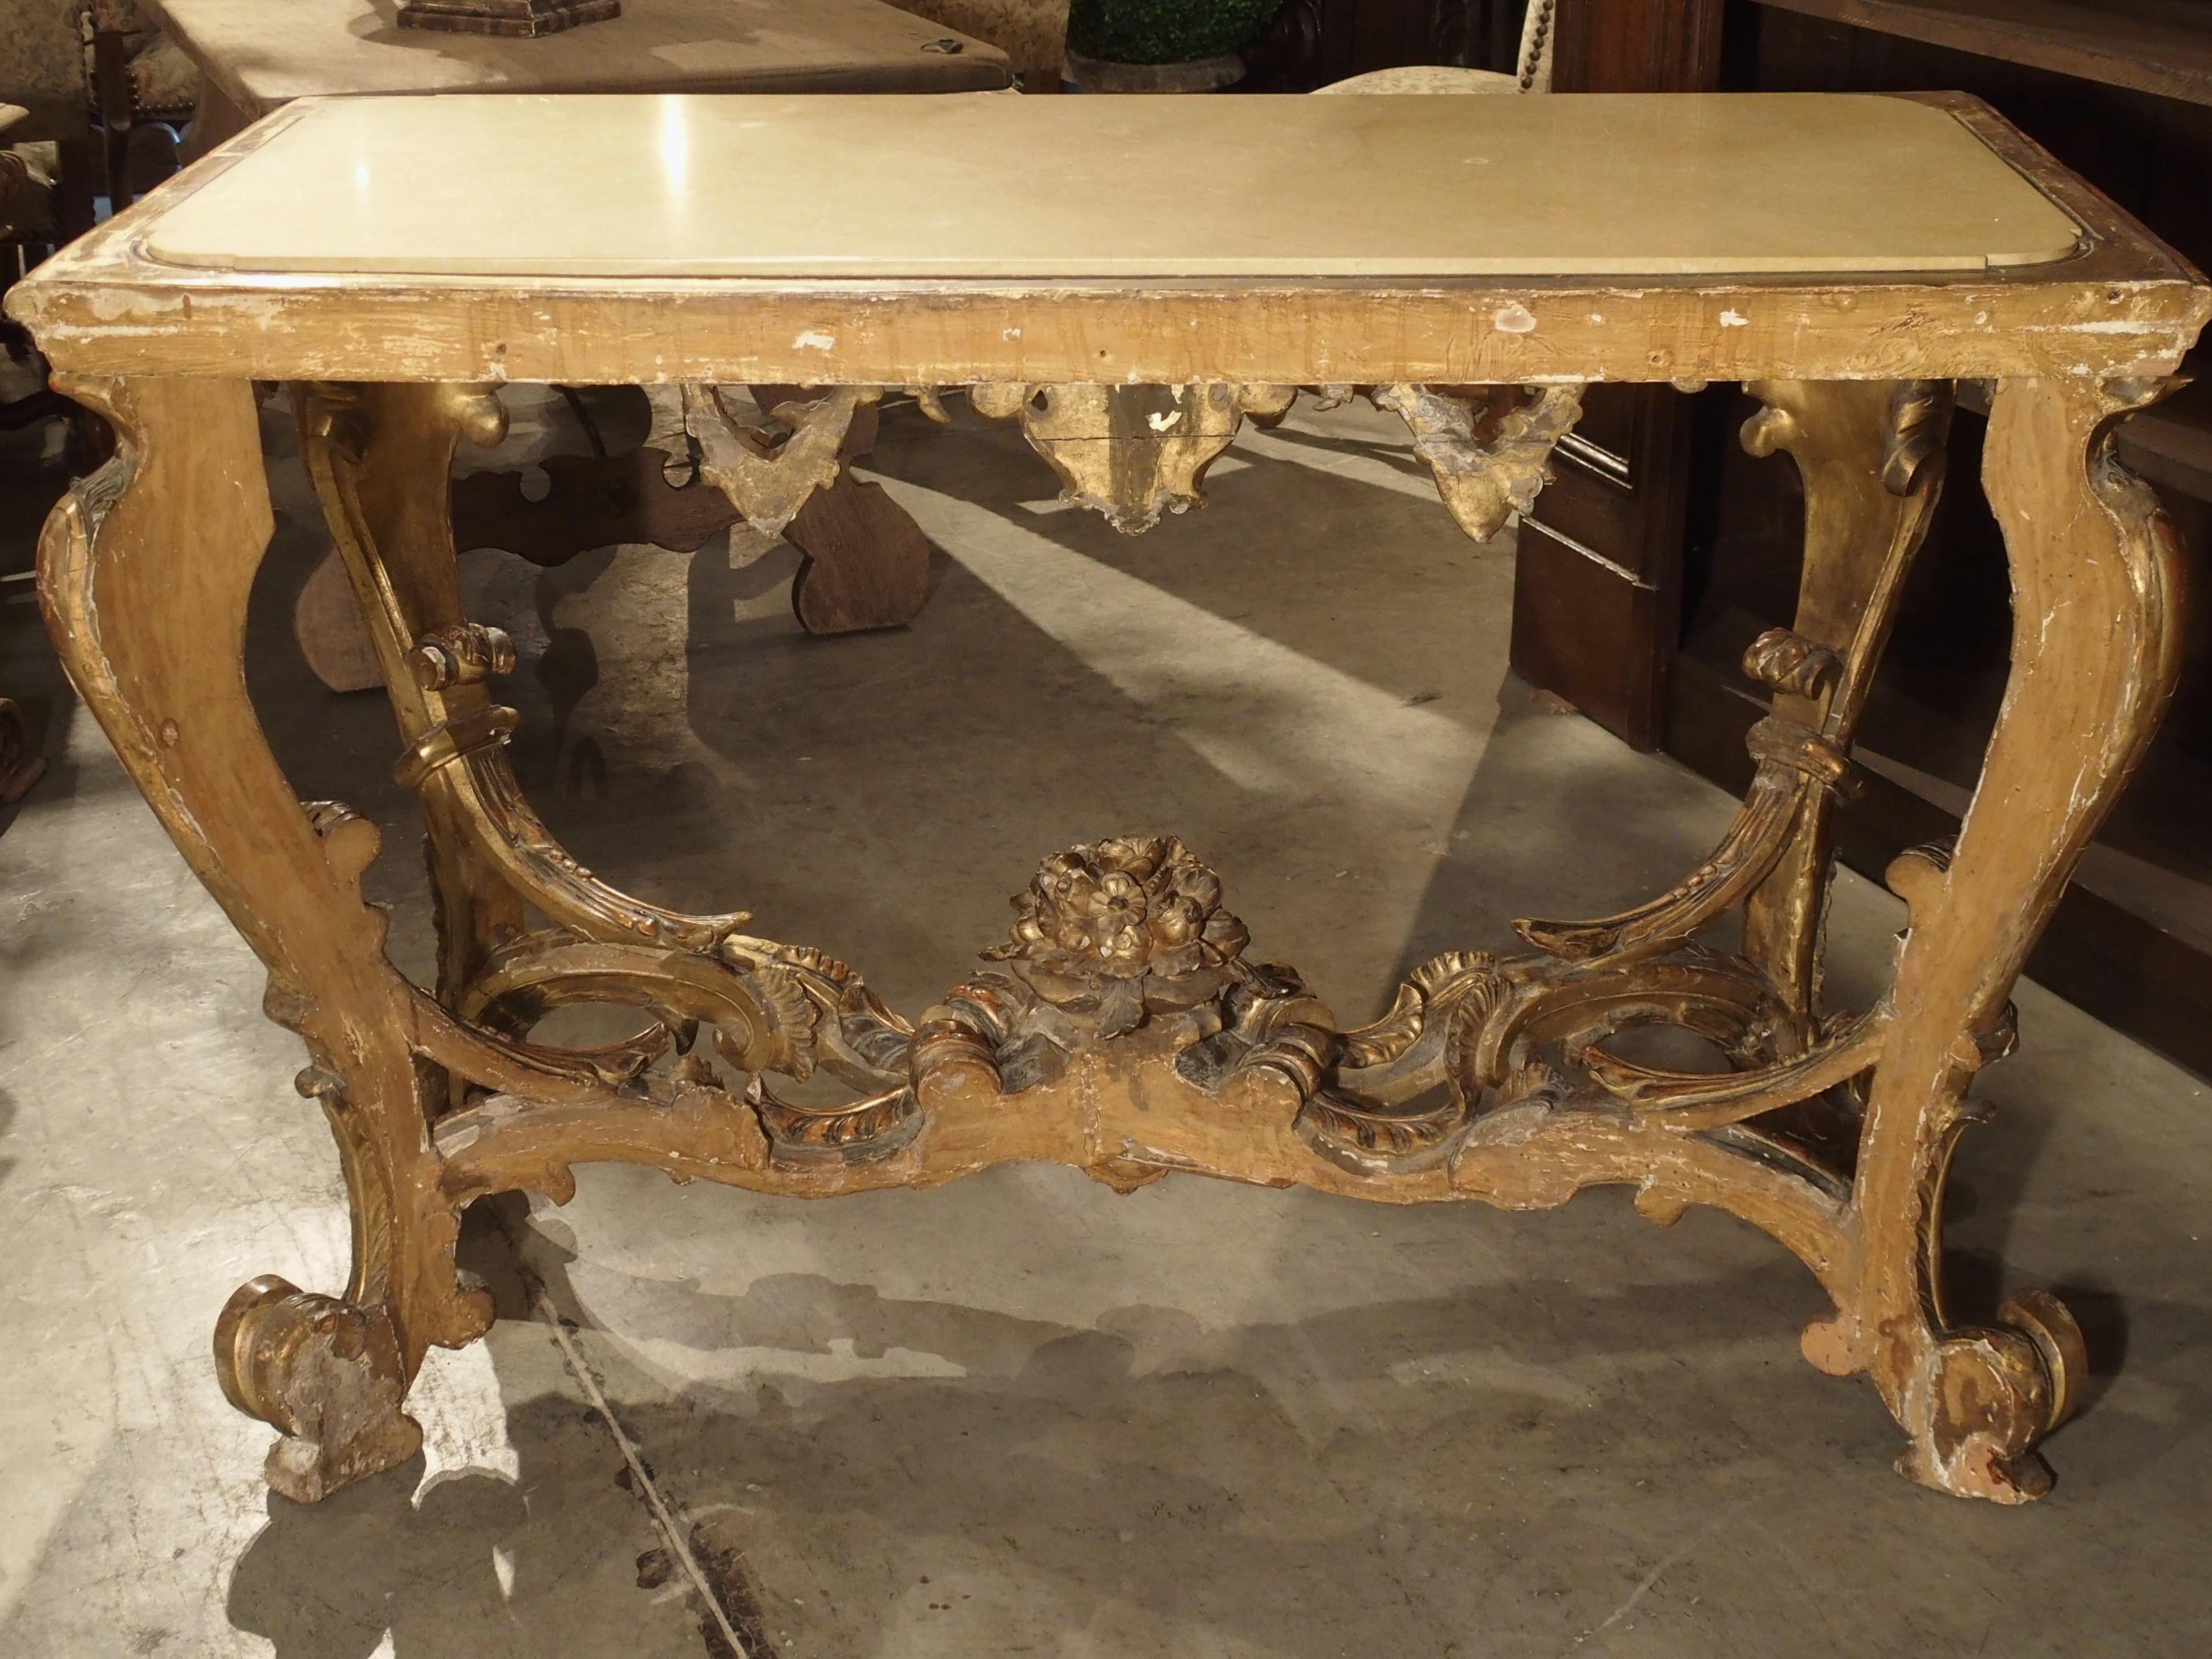 This Italian giltwood console is from the late 1600’s to the turn of the 18th century. It has a cream and beige colored inset marble top. This type of piece, with cabriole legs and shaped apron was directly inspired by French models, but the bolder